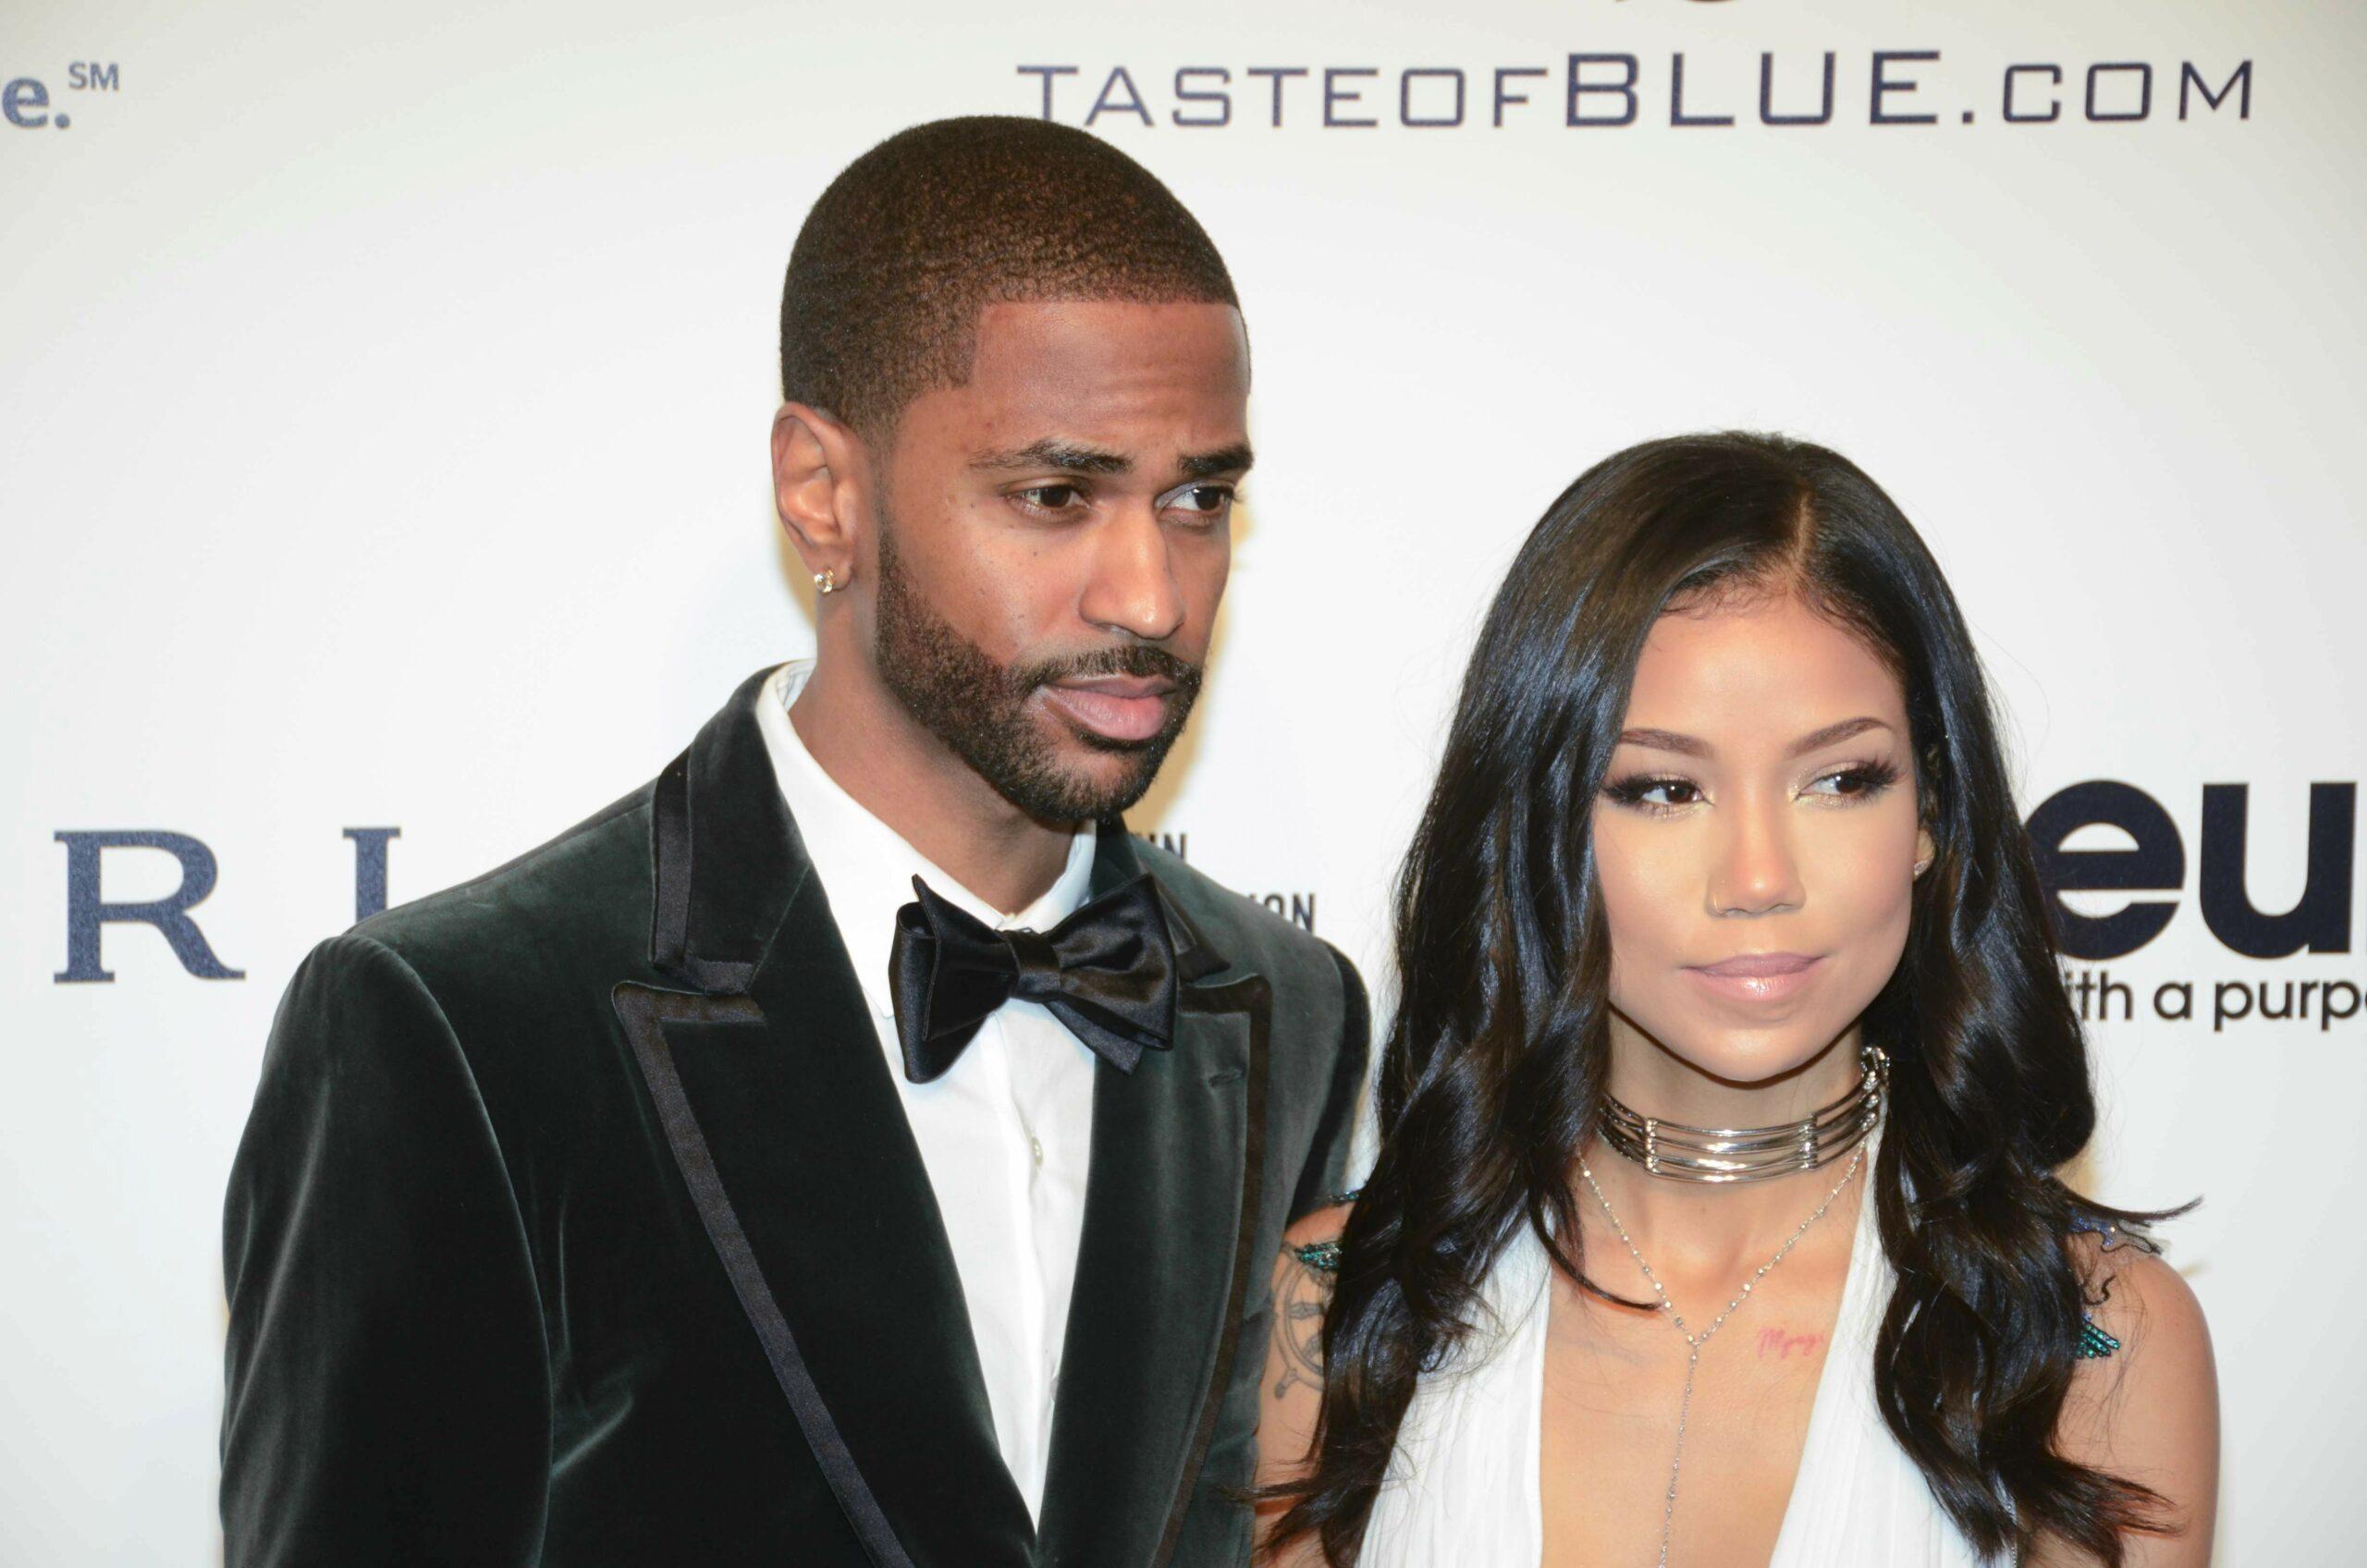 Big Sean & Jhene Aiko at Elton Johns Academy Awards Viewing Party 2017 in Hollywood